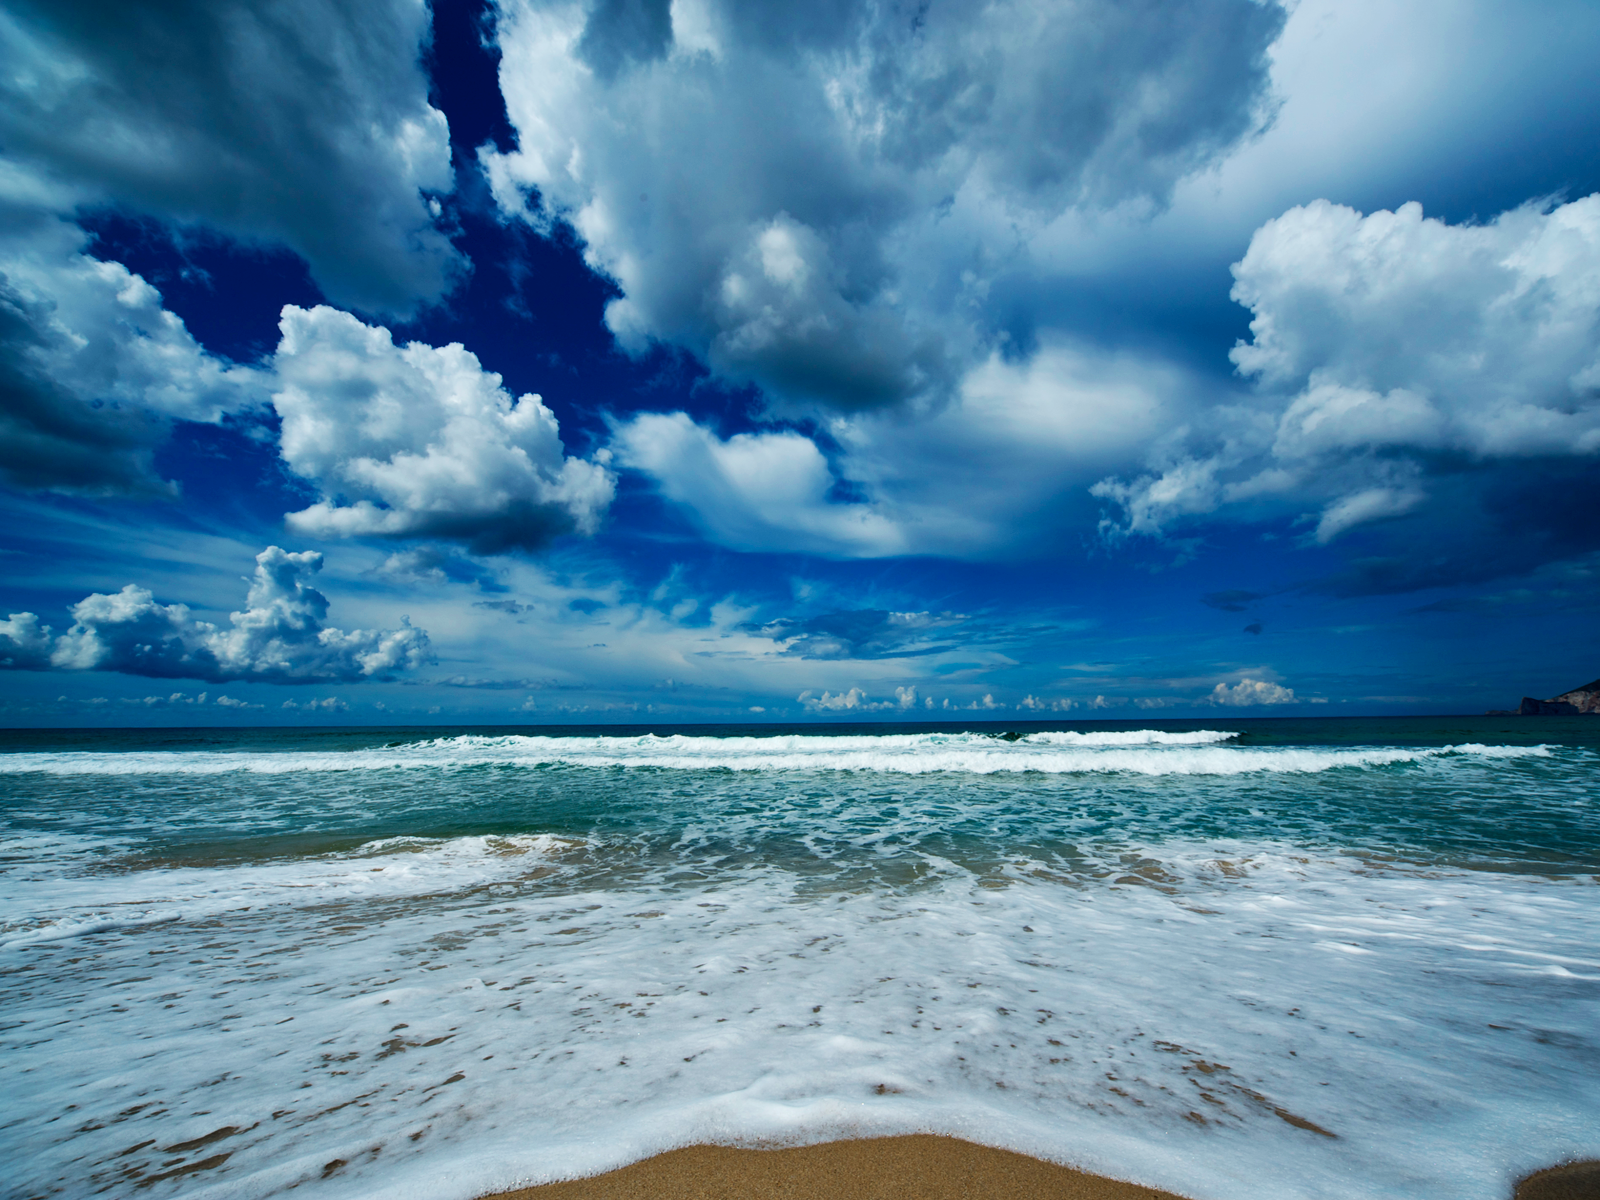 Beach Surf And Clouds Wlp